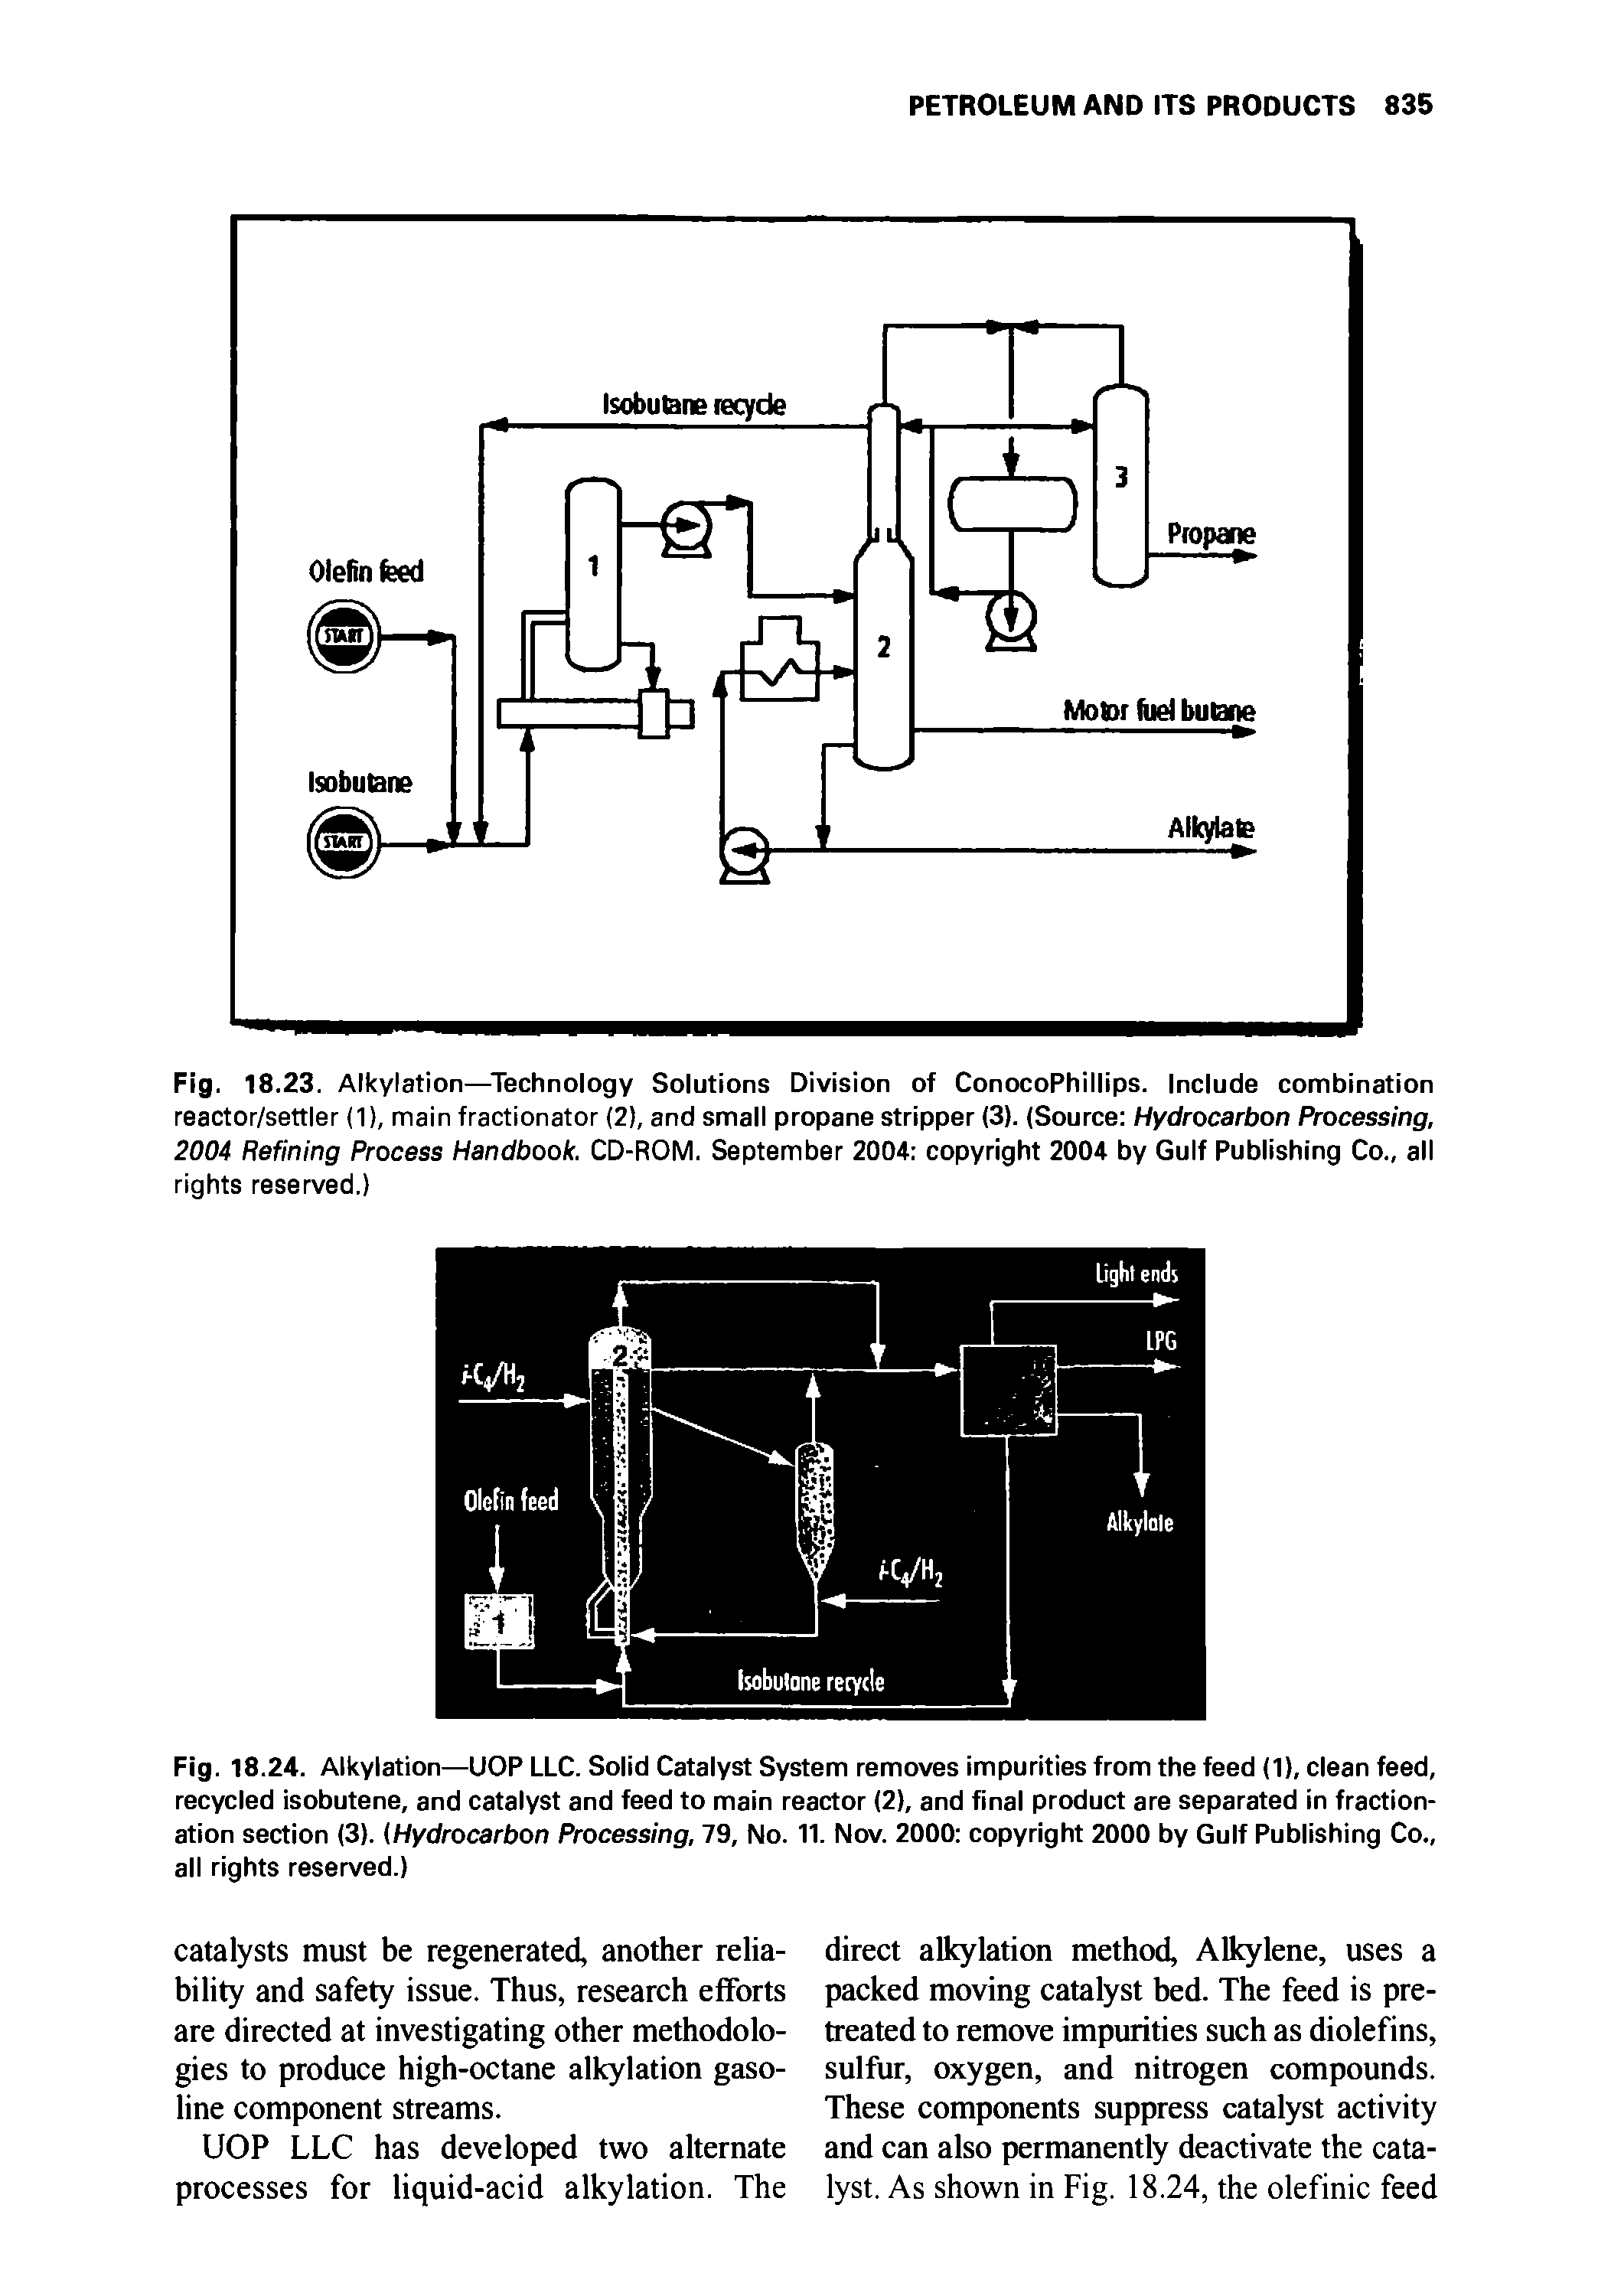 Fig. 18.23. Alkylation—Technology Solutions Division of ConocoPhillips. Include combination reactor/settler (1), main fractionator (2), and small propane stripper (3). (Source Hydrocarbon Processing, 2004 Refining Process Handbook. CD-ROM. September 2004 copyright 2004 by Gulf Publishing Co., all rights reserved.)...